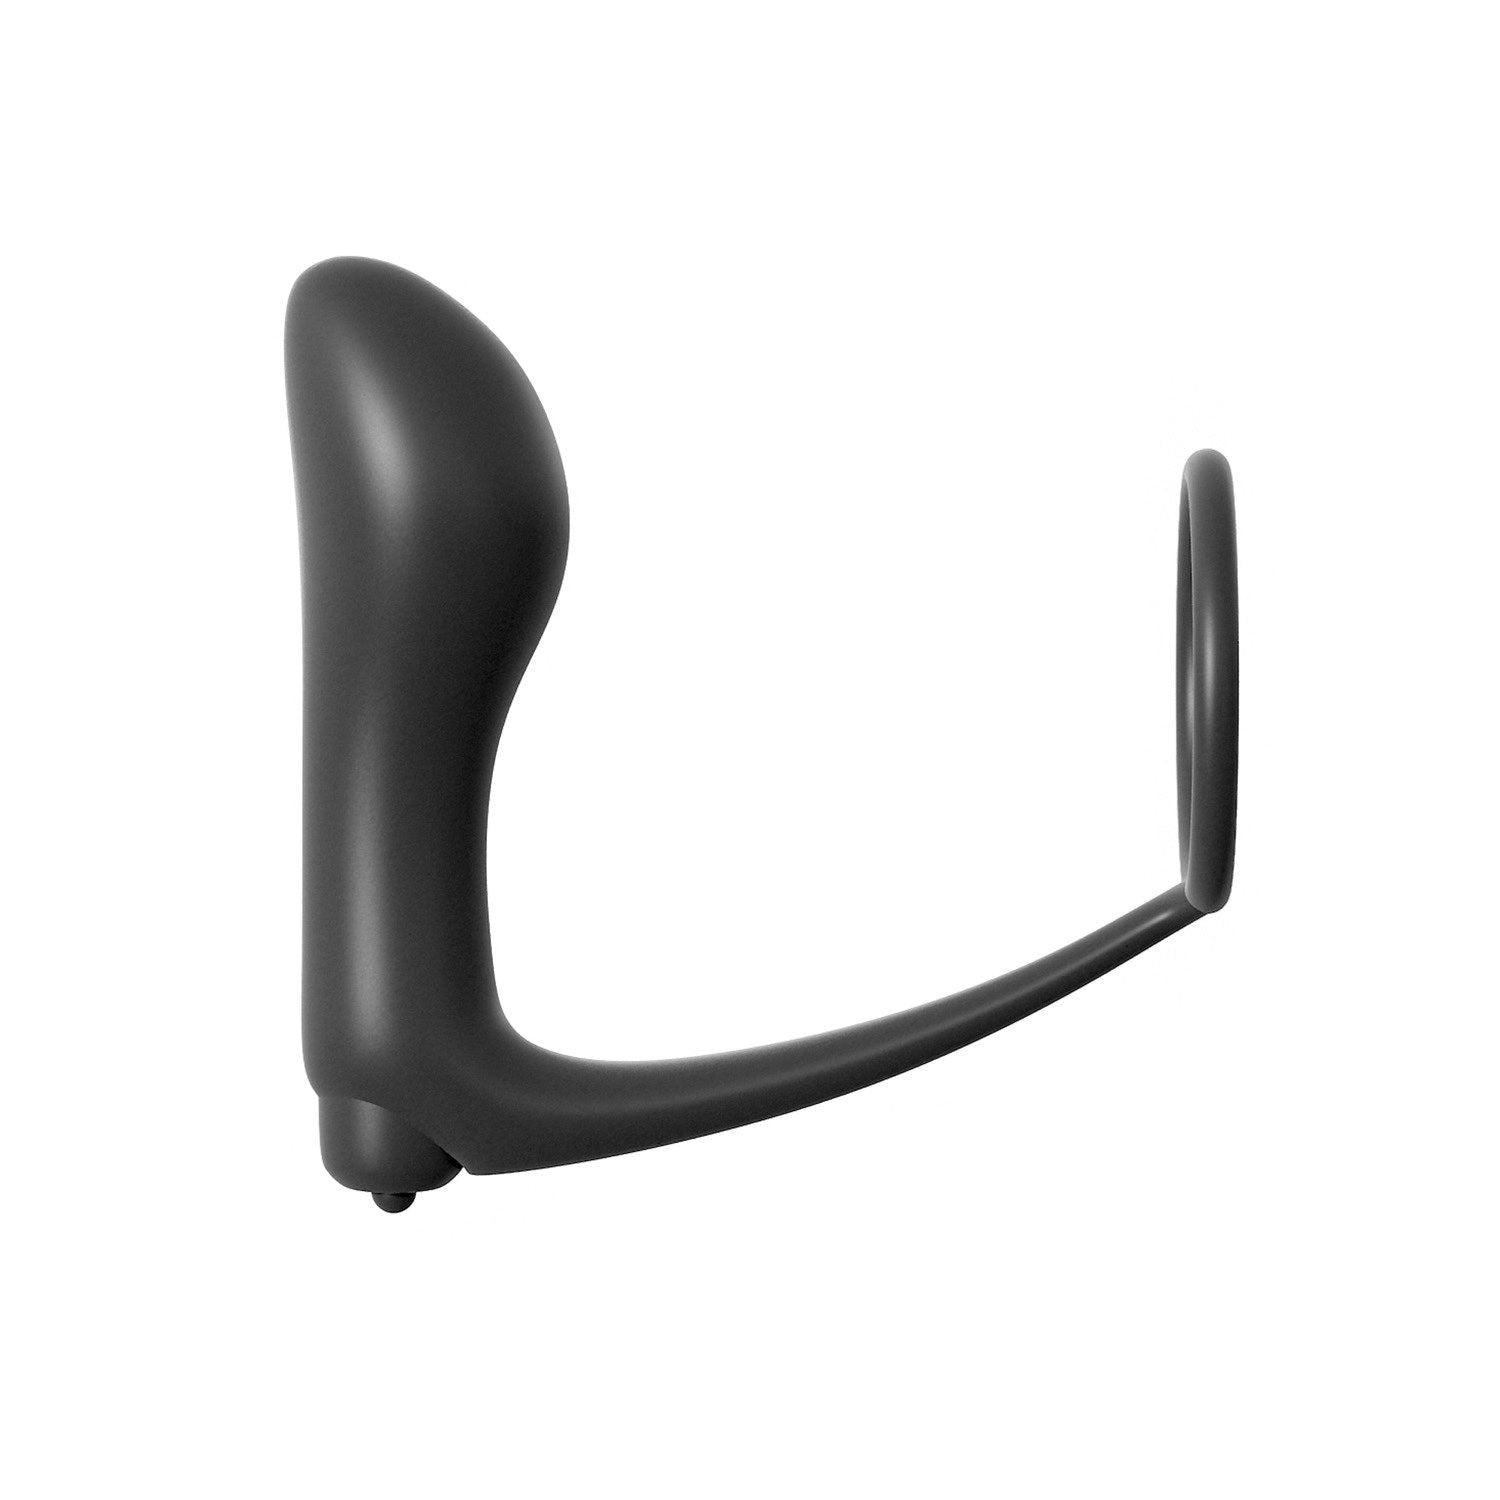 Anal Fantasy Collection Ass-gasm Cockring Plug - Black Vibrating Butt Plug with Cock Ring by Pipedream